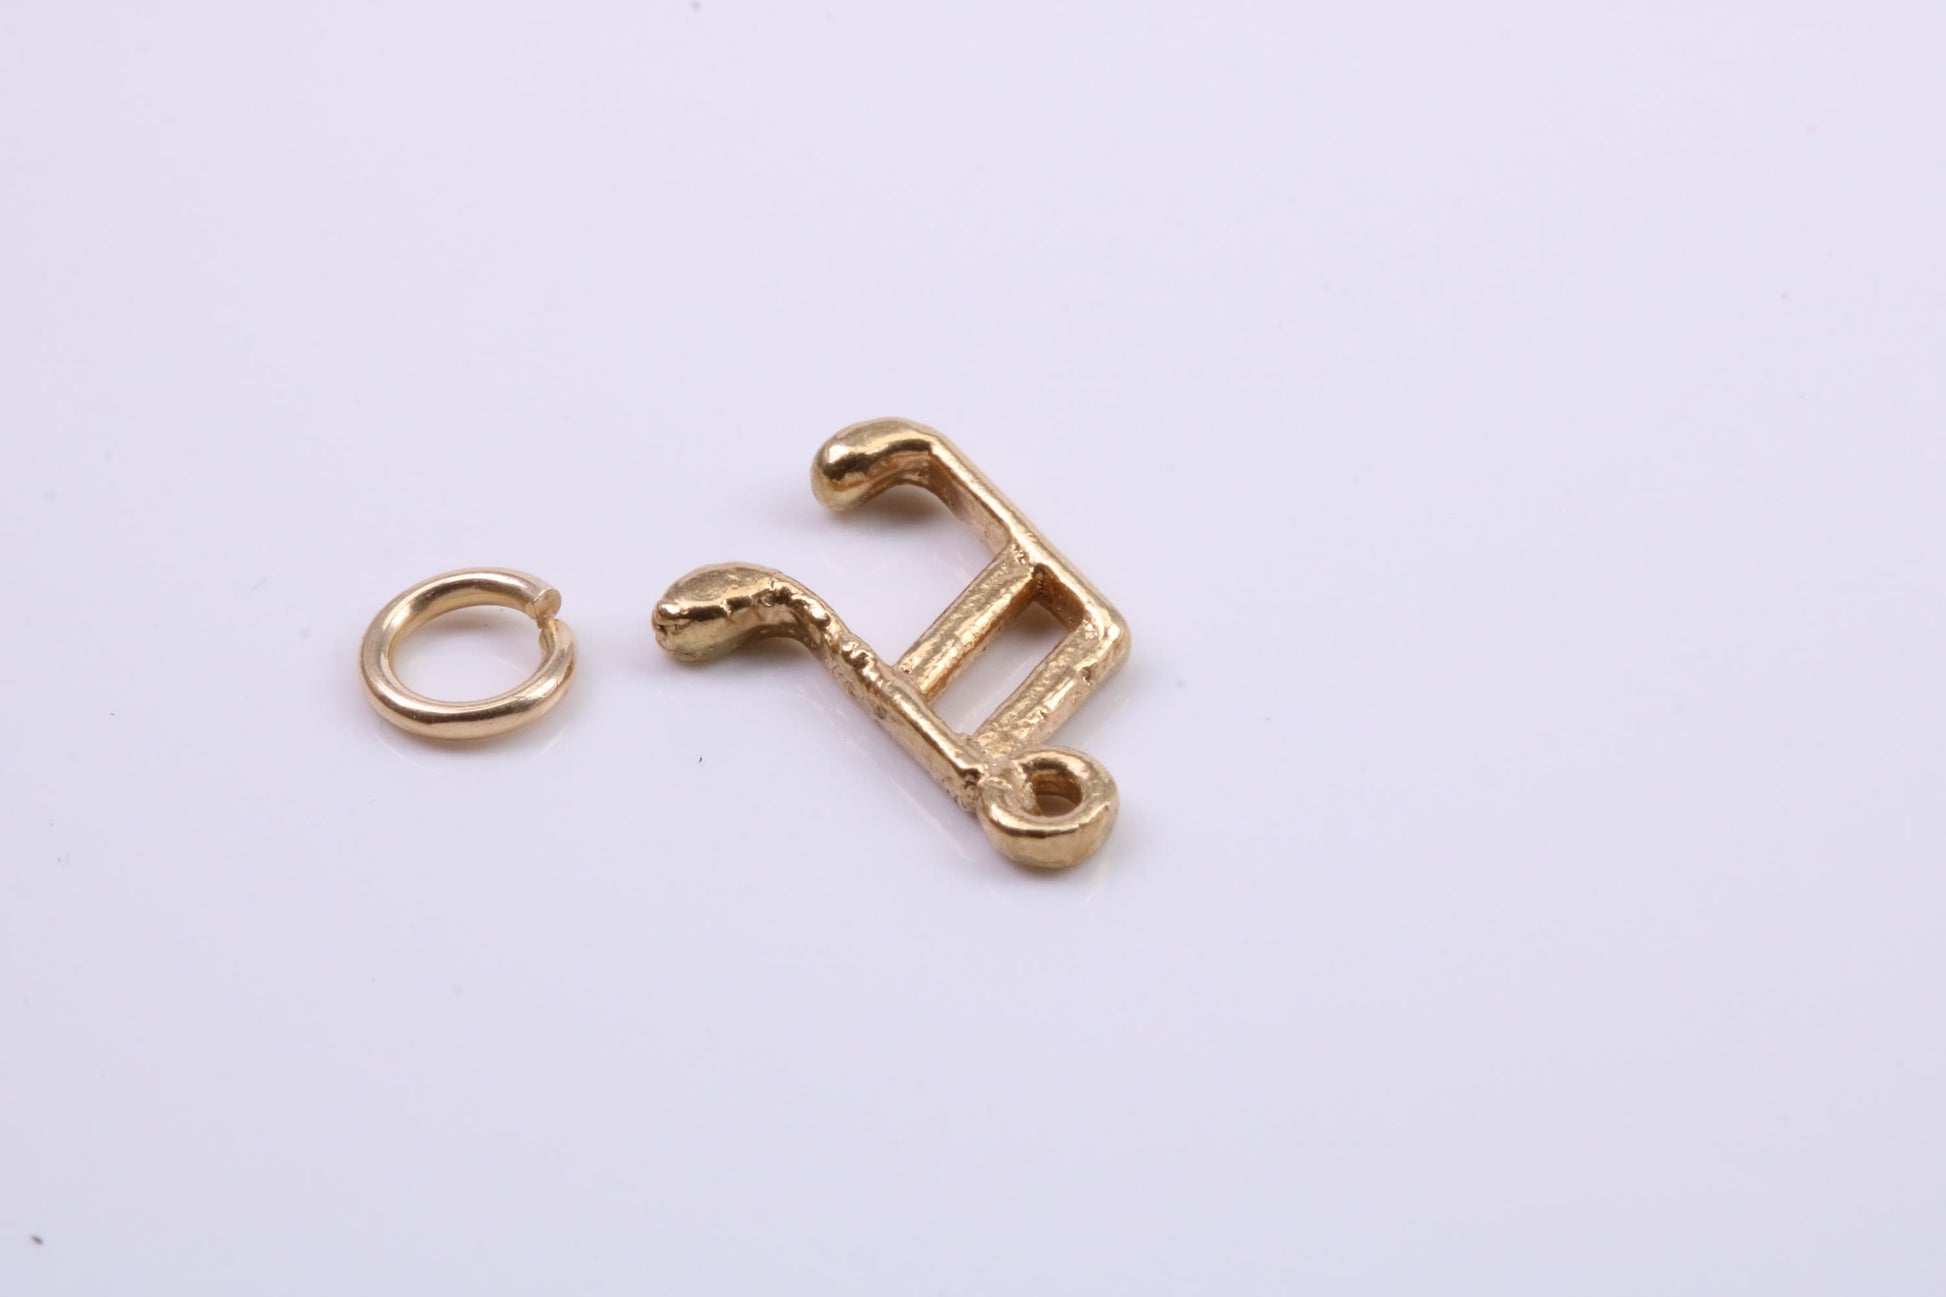 Musical Beam Note Charm, Traditional Charm, Made from Solid 9ct Yellow Gold, British Hallmarked, Complete with Attachment Link